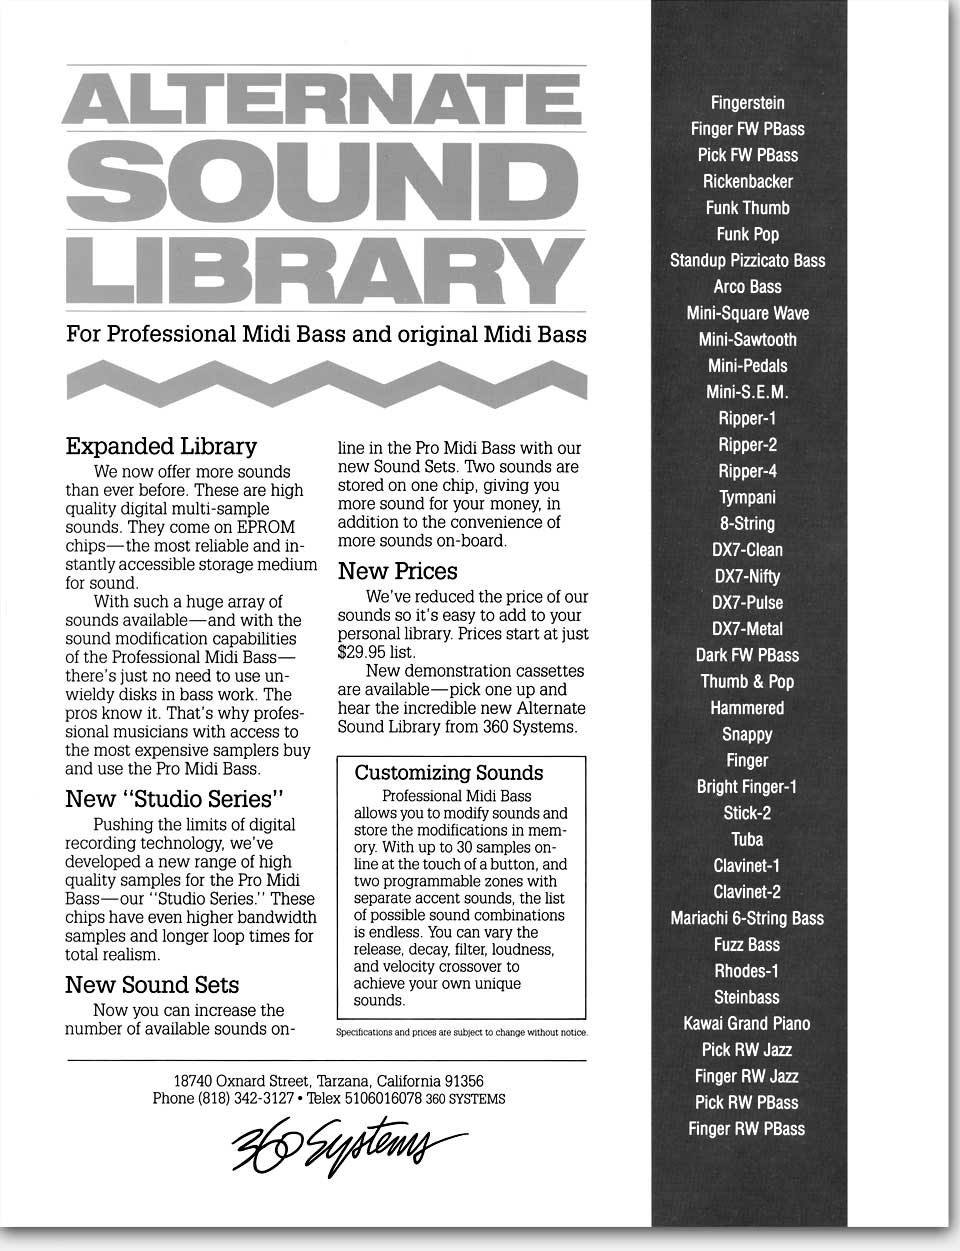 Original data sheet: Alternate Sound Library for Professional Midi Bass and original Midi Bass by 360 Systems, mid-1980s. Eric Wrobbel Design. The Midi Bass is perhaps best known for that distinctive bass sound heard as musical intros and outros on the television show 'Seinfeld.' Other Midi Bass and more vintage gear: https://www.ericwrobbel.com/art/360datasheets.htm